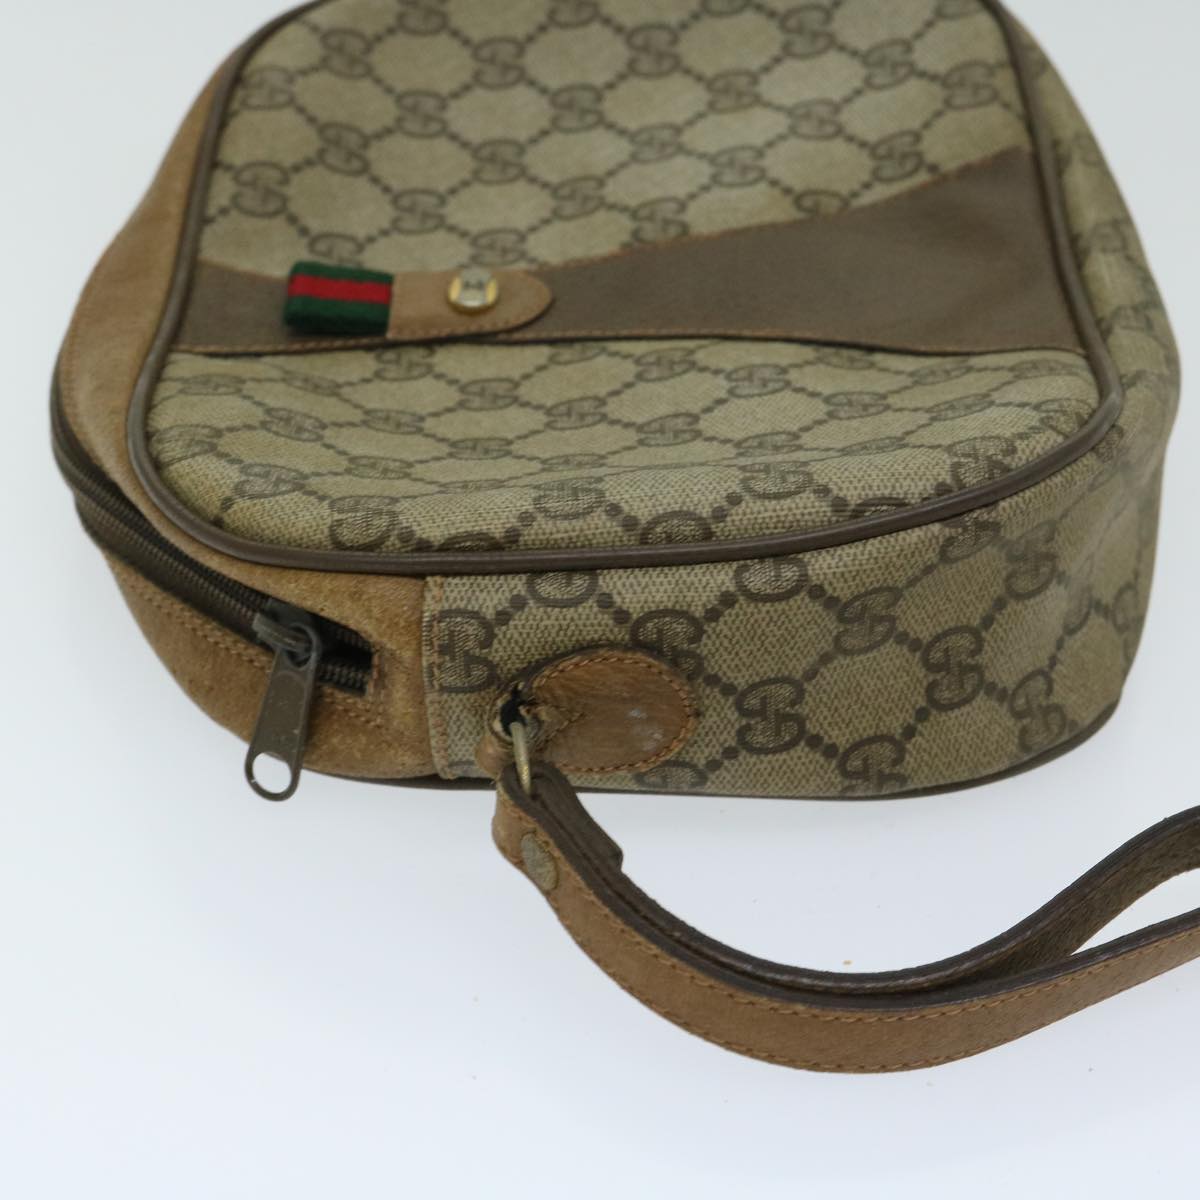 GUCCI GG Supreme Web Sherry Line Clutch Bag Beige Red Green 89 01 034 Auth 67426